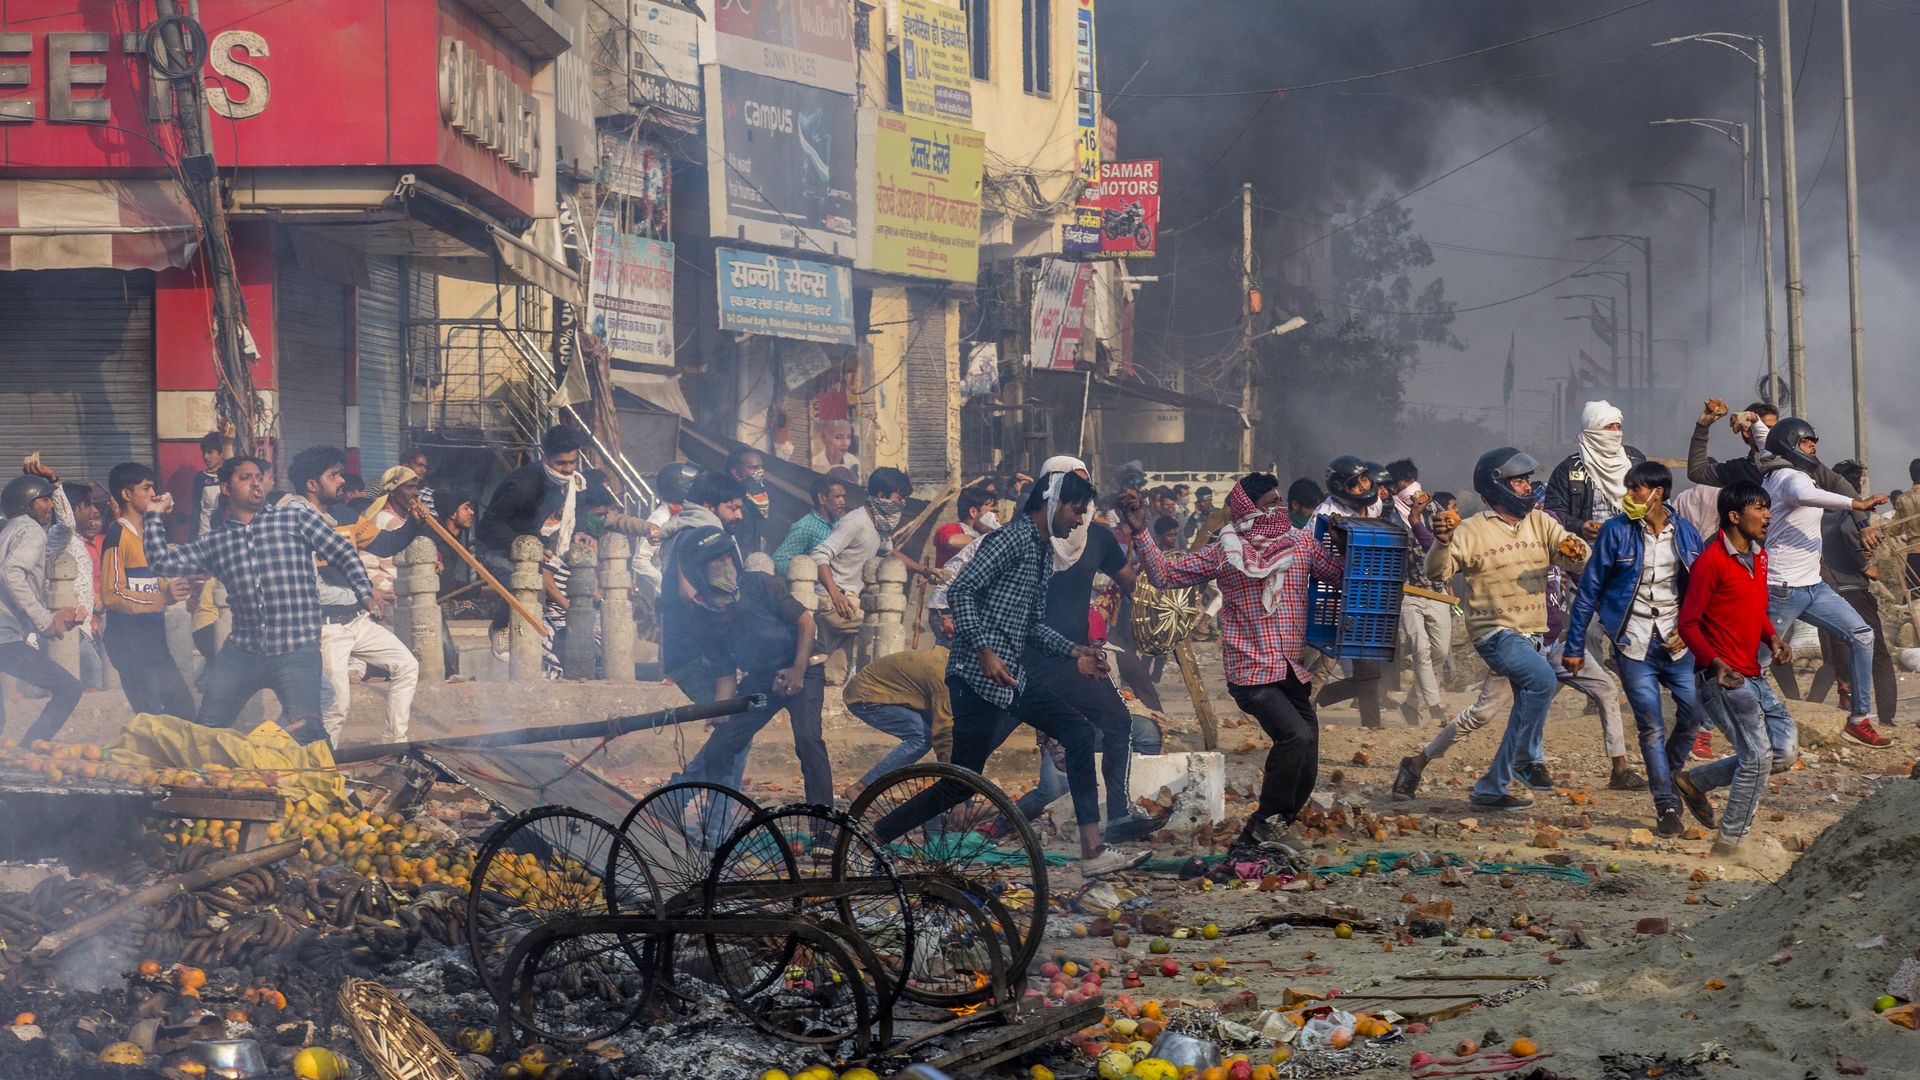 Protesters opposing a new citizenship law throw bricks and stones at those who are opposing the law in Delhi, India.